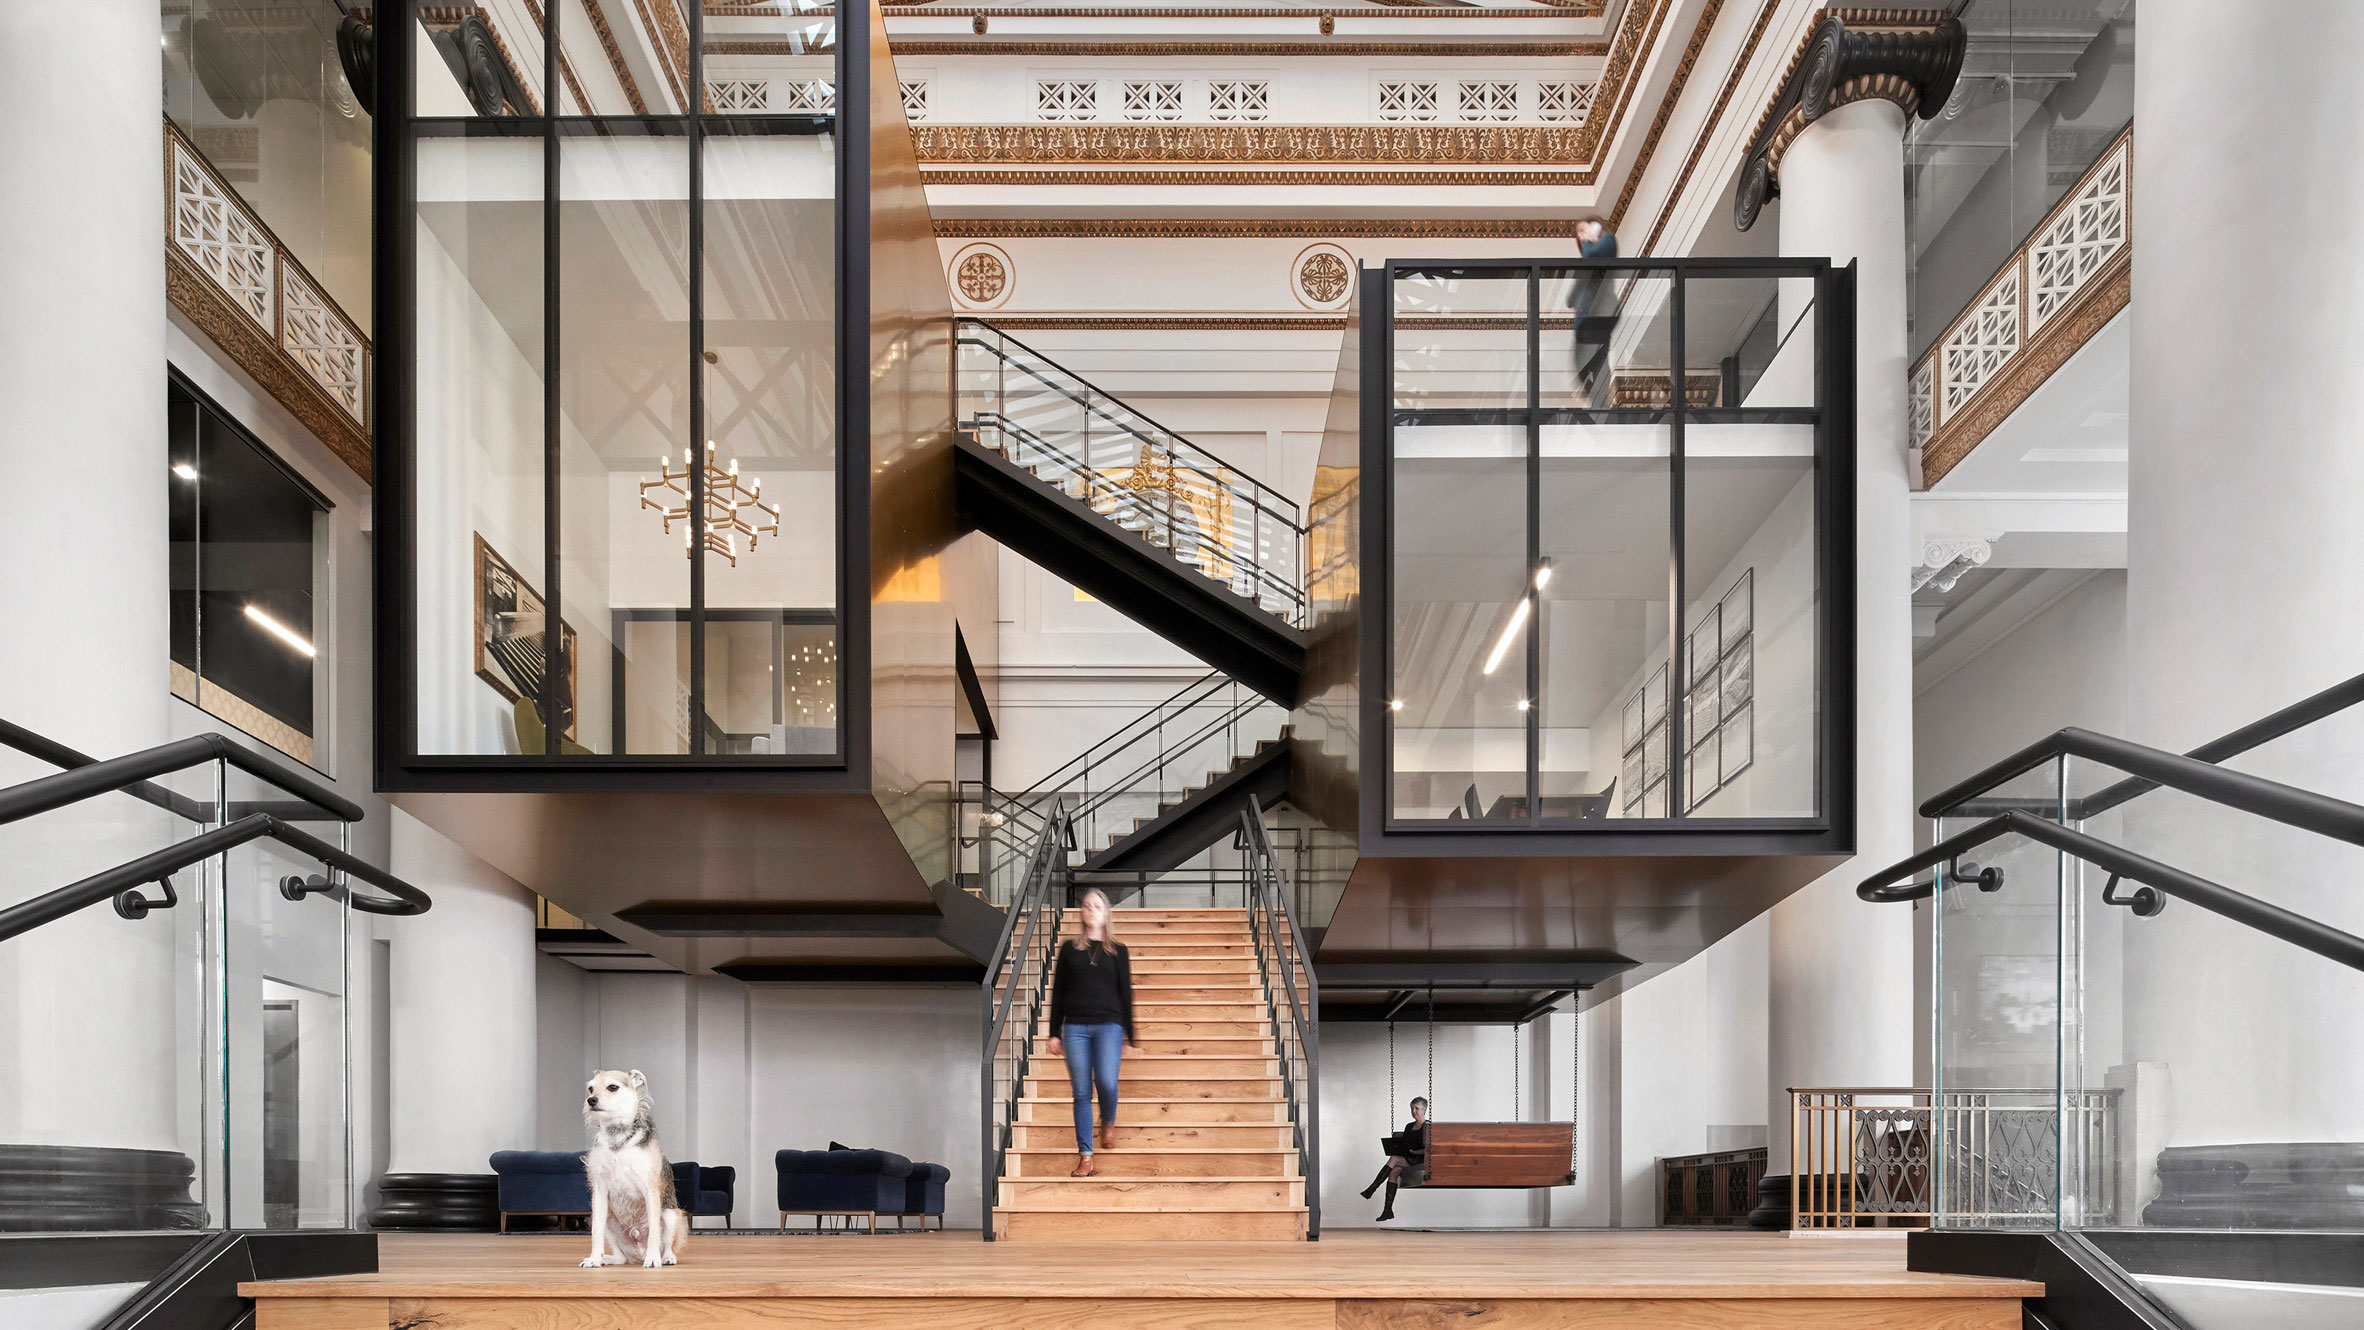 ZGF Architects transforms historic Portland bank building into Expensify office